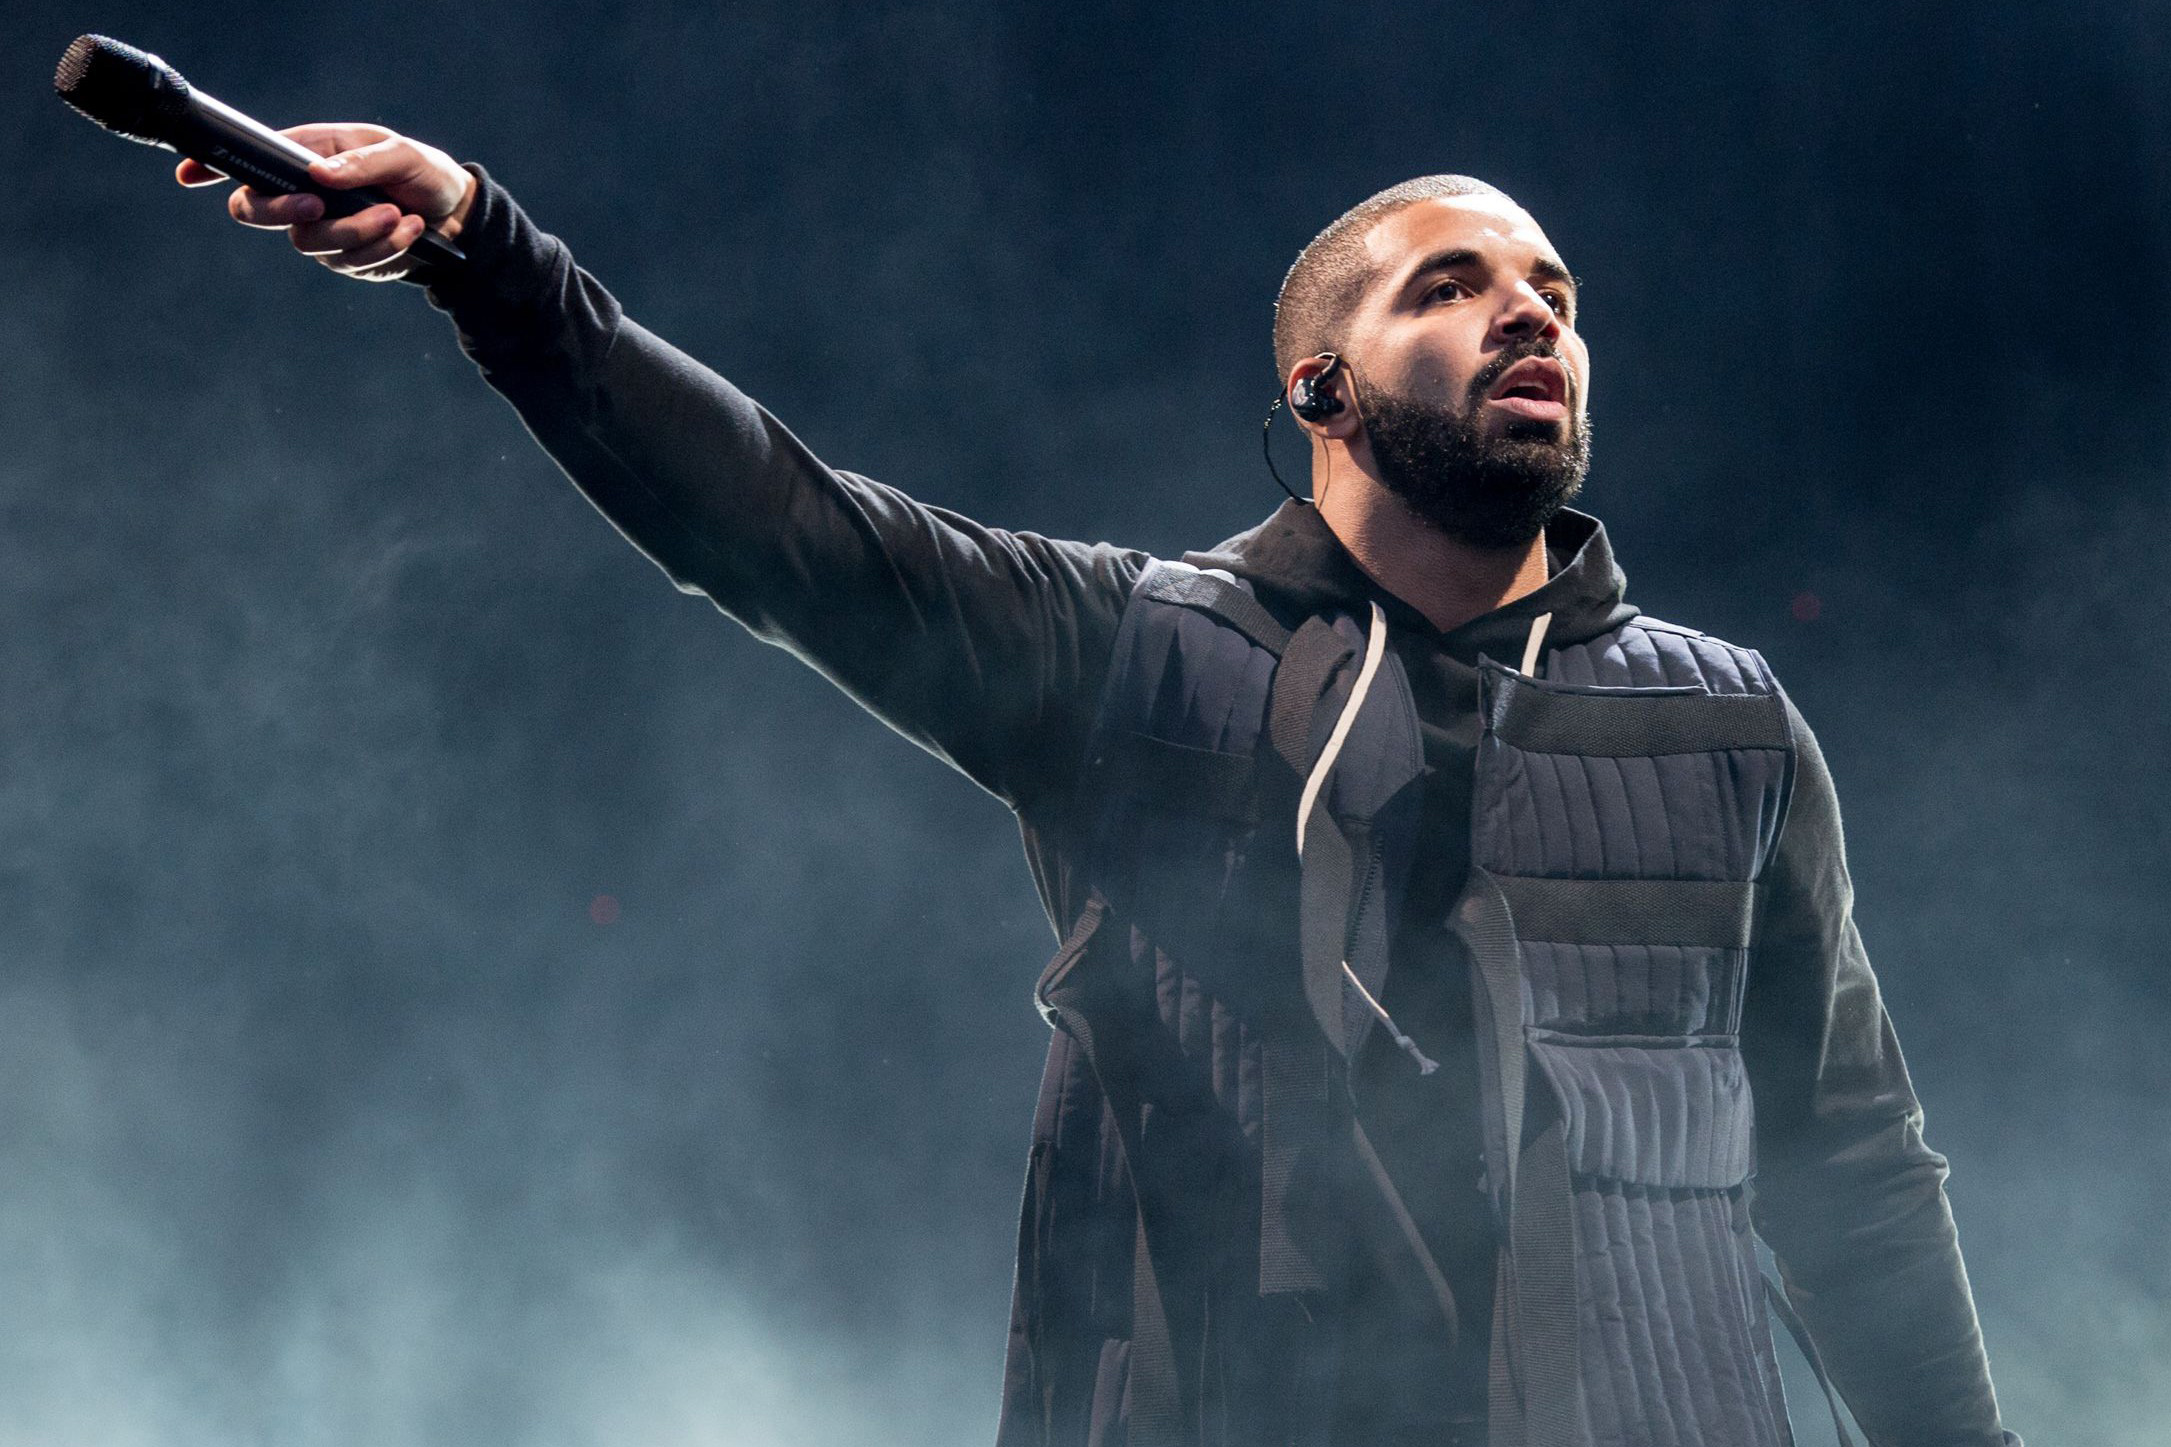 This Sunday, Drake’s 30th birthday falls on the same day as the latest epis...